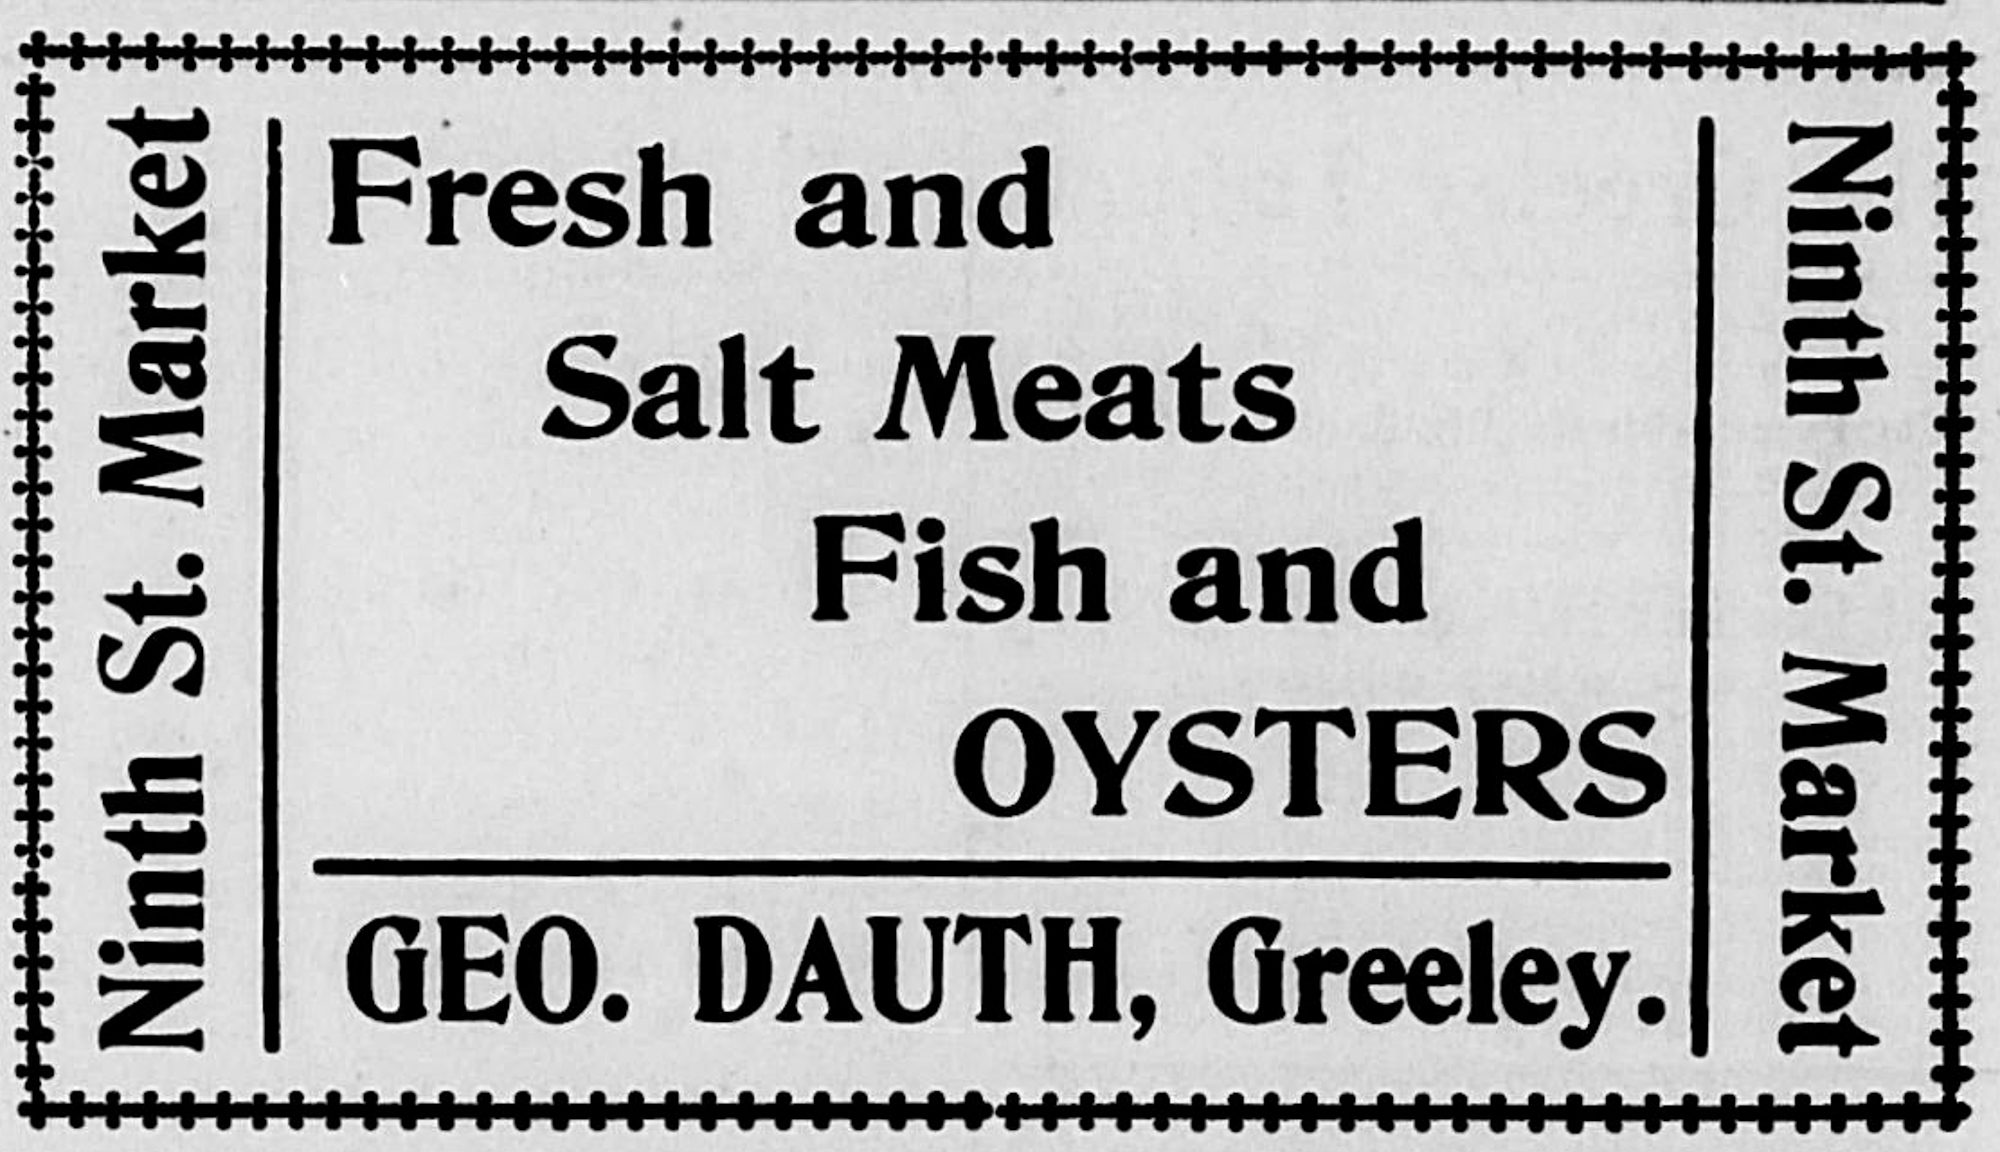 Dauth Family Archive - 1904-10-26 - The Greeley Tribune - George Dauth Store Advertisement